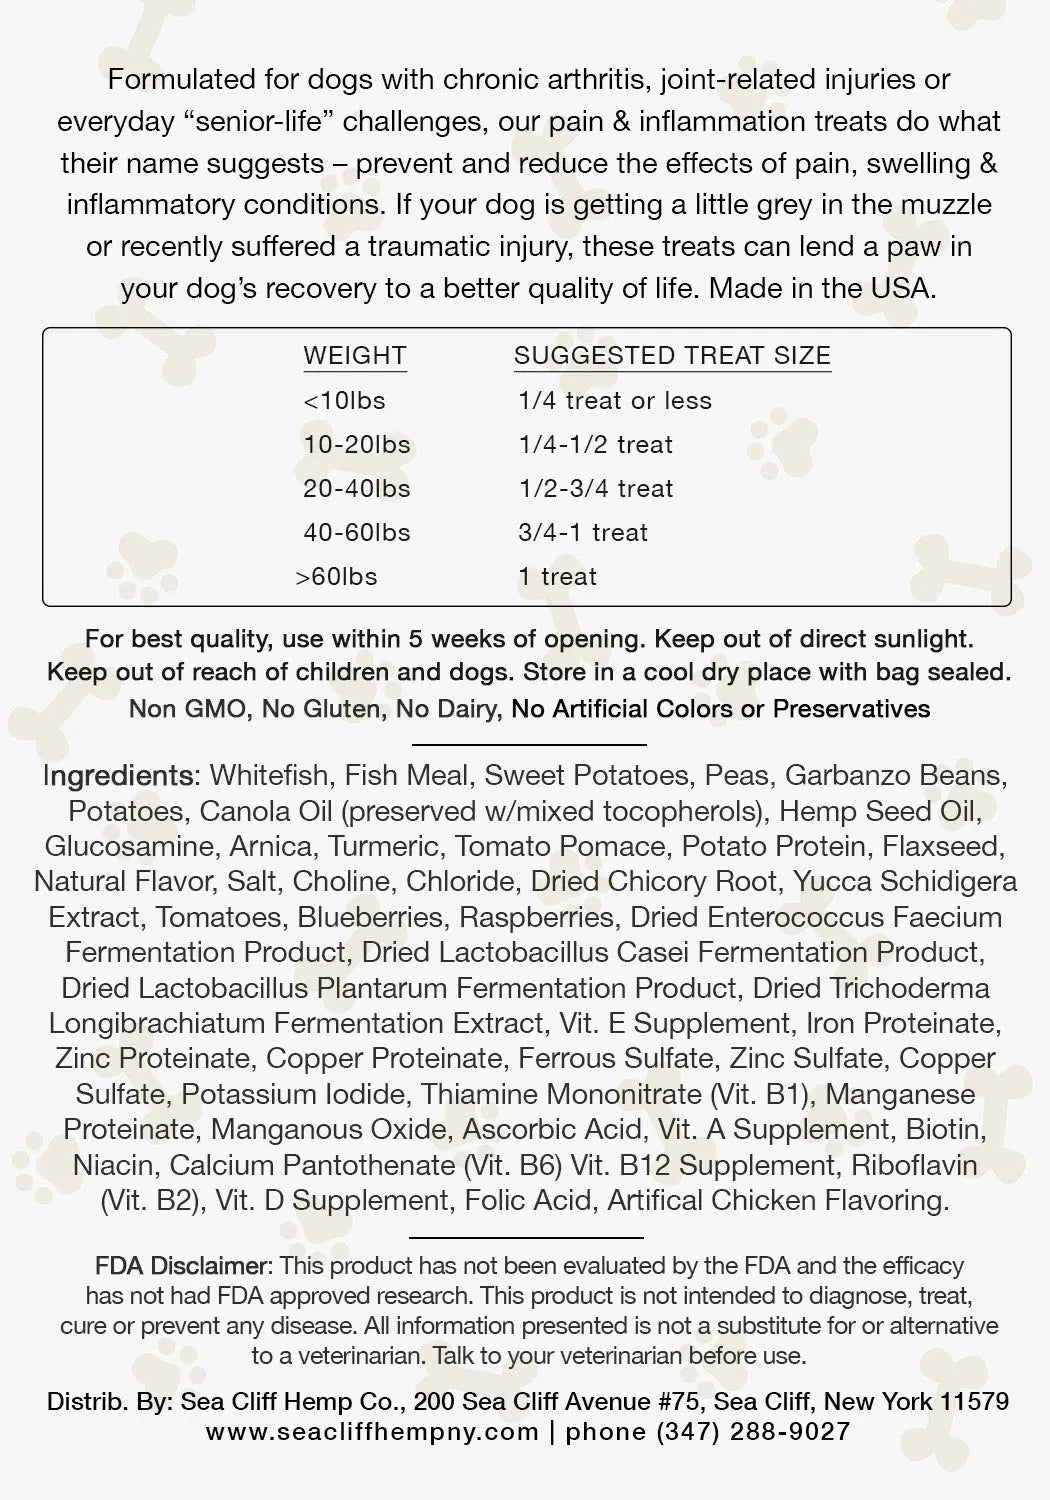 Natural CBD dog treats for inflammation, joint & muscle pain, calming. Zero THC.